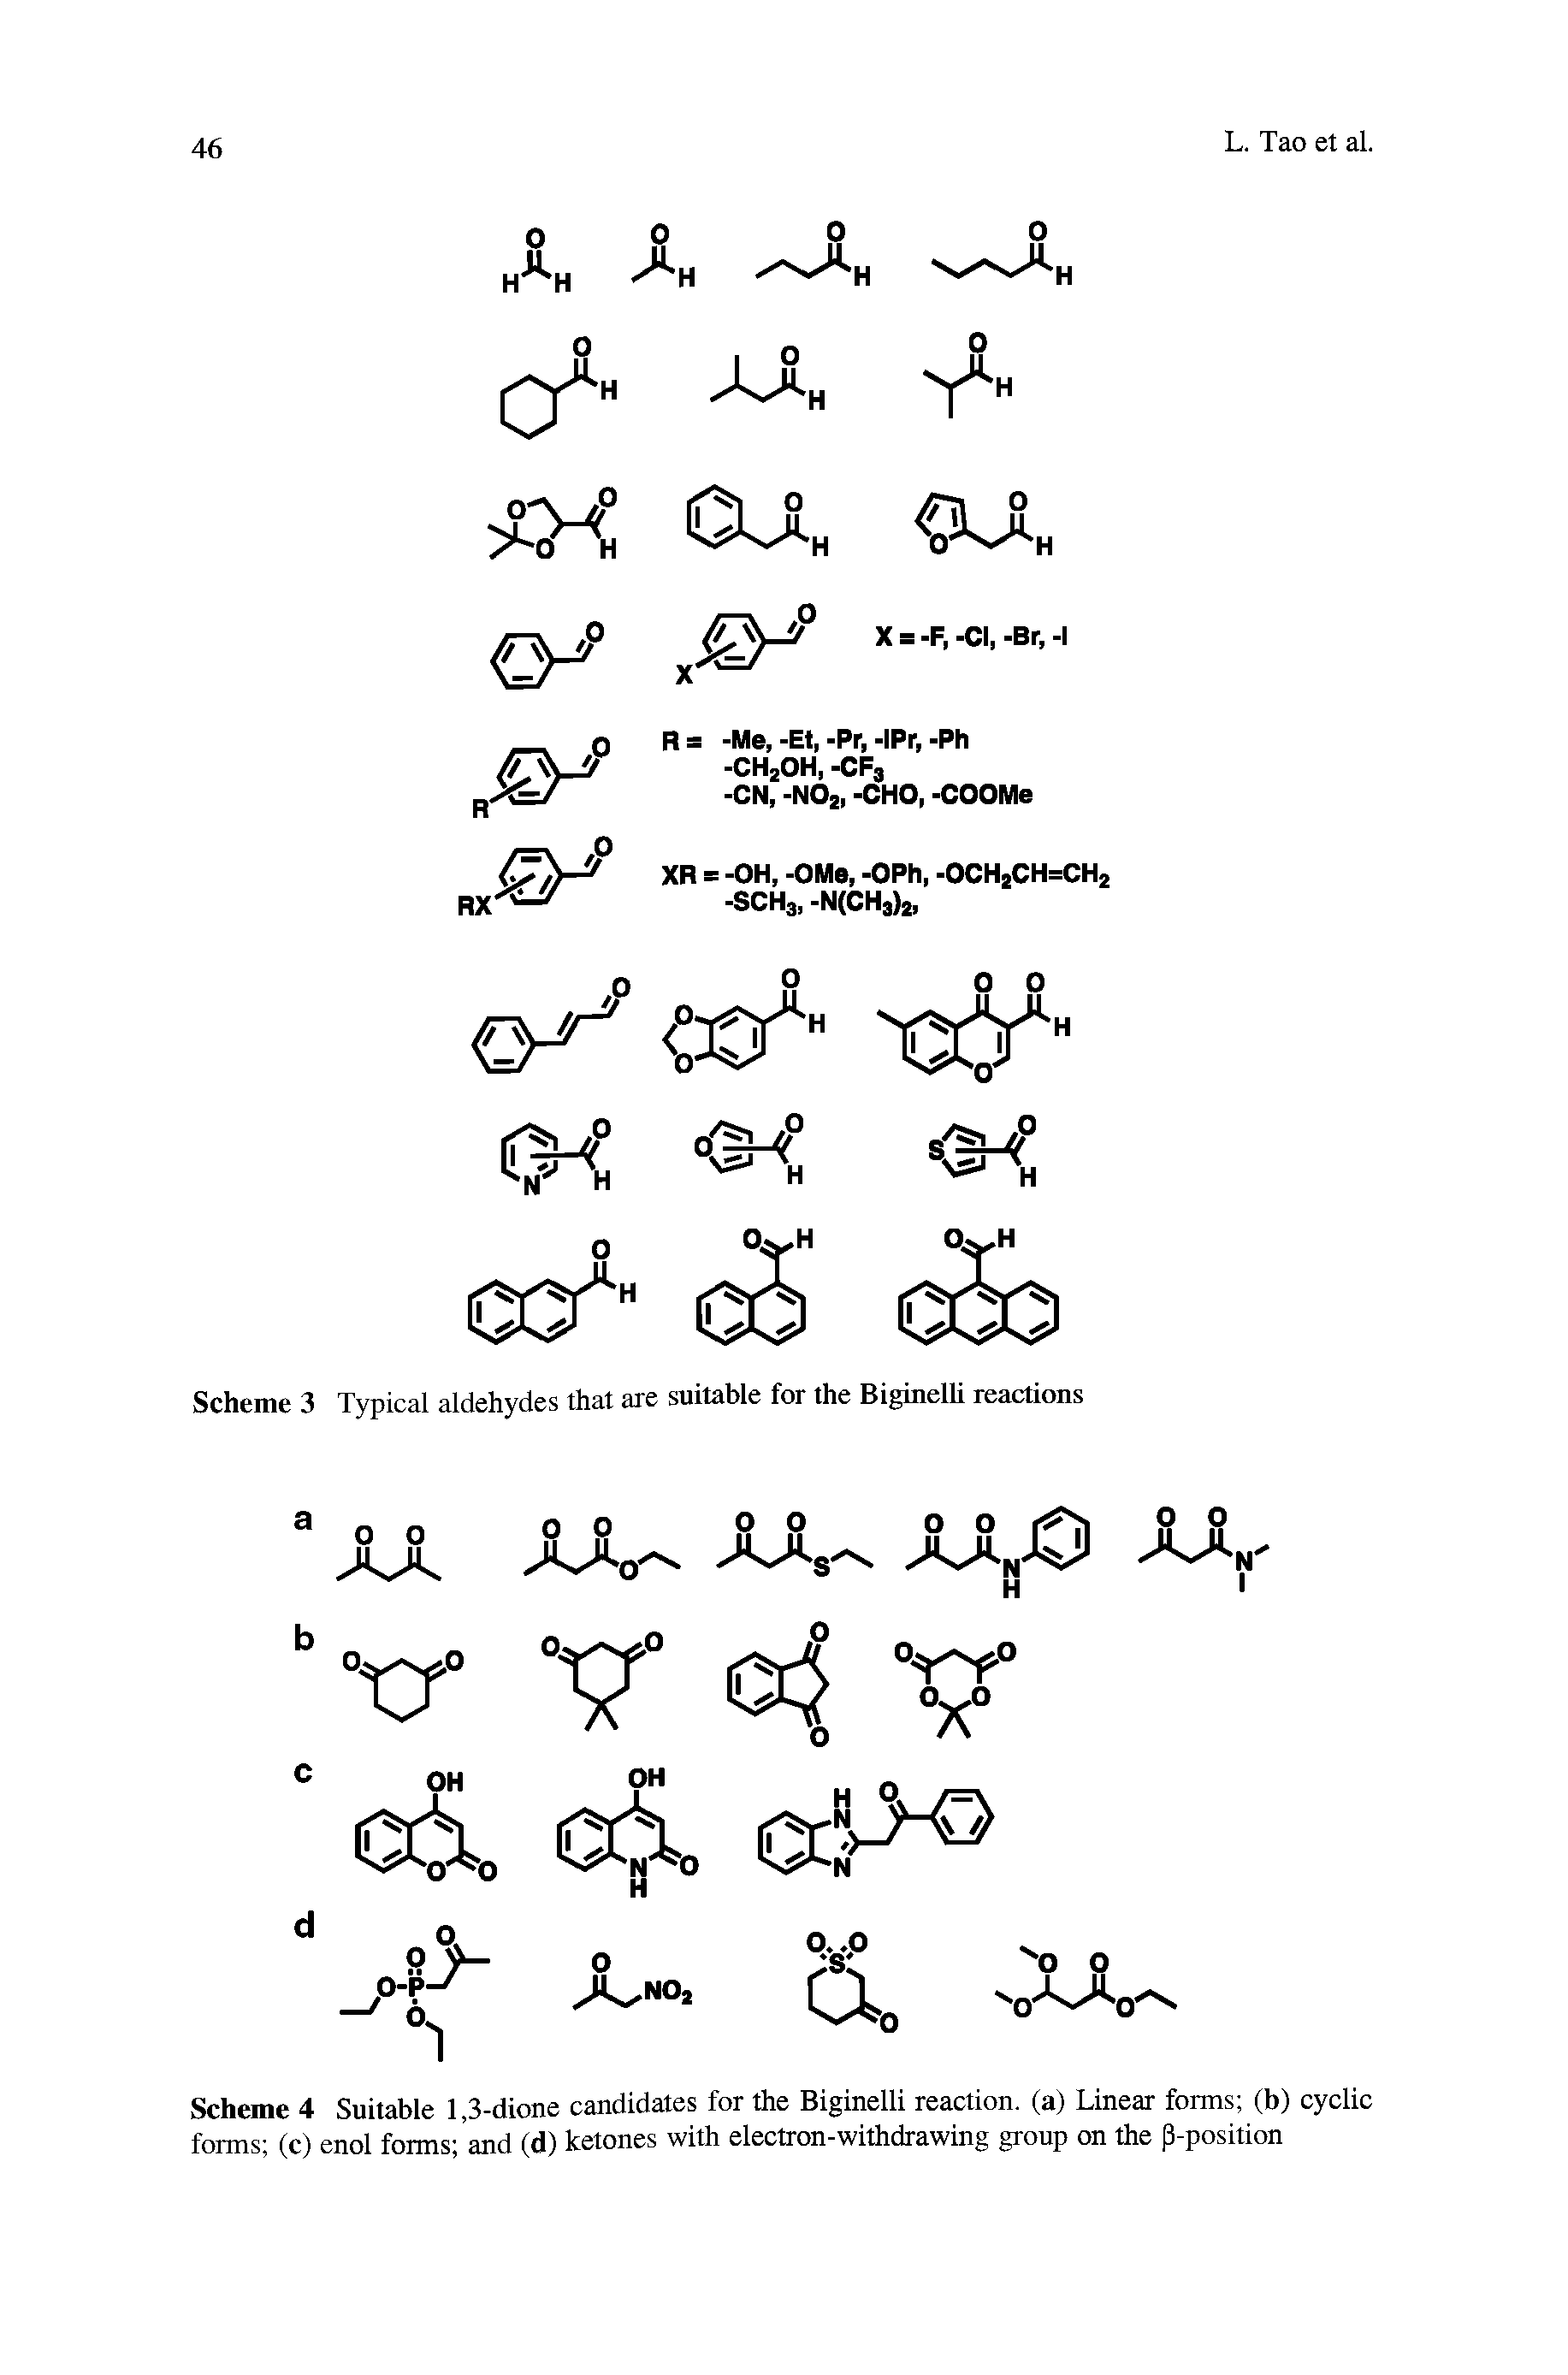 Scheme 4 Suitable 1,3-dione candidates for the Biginelli reaction, (a) Linear forms (b) cyclic forms (c) enol forms and (d) ketones with electron-withdrawing group on the p-position...